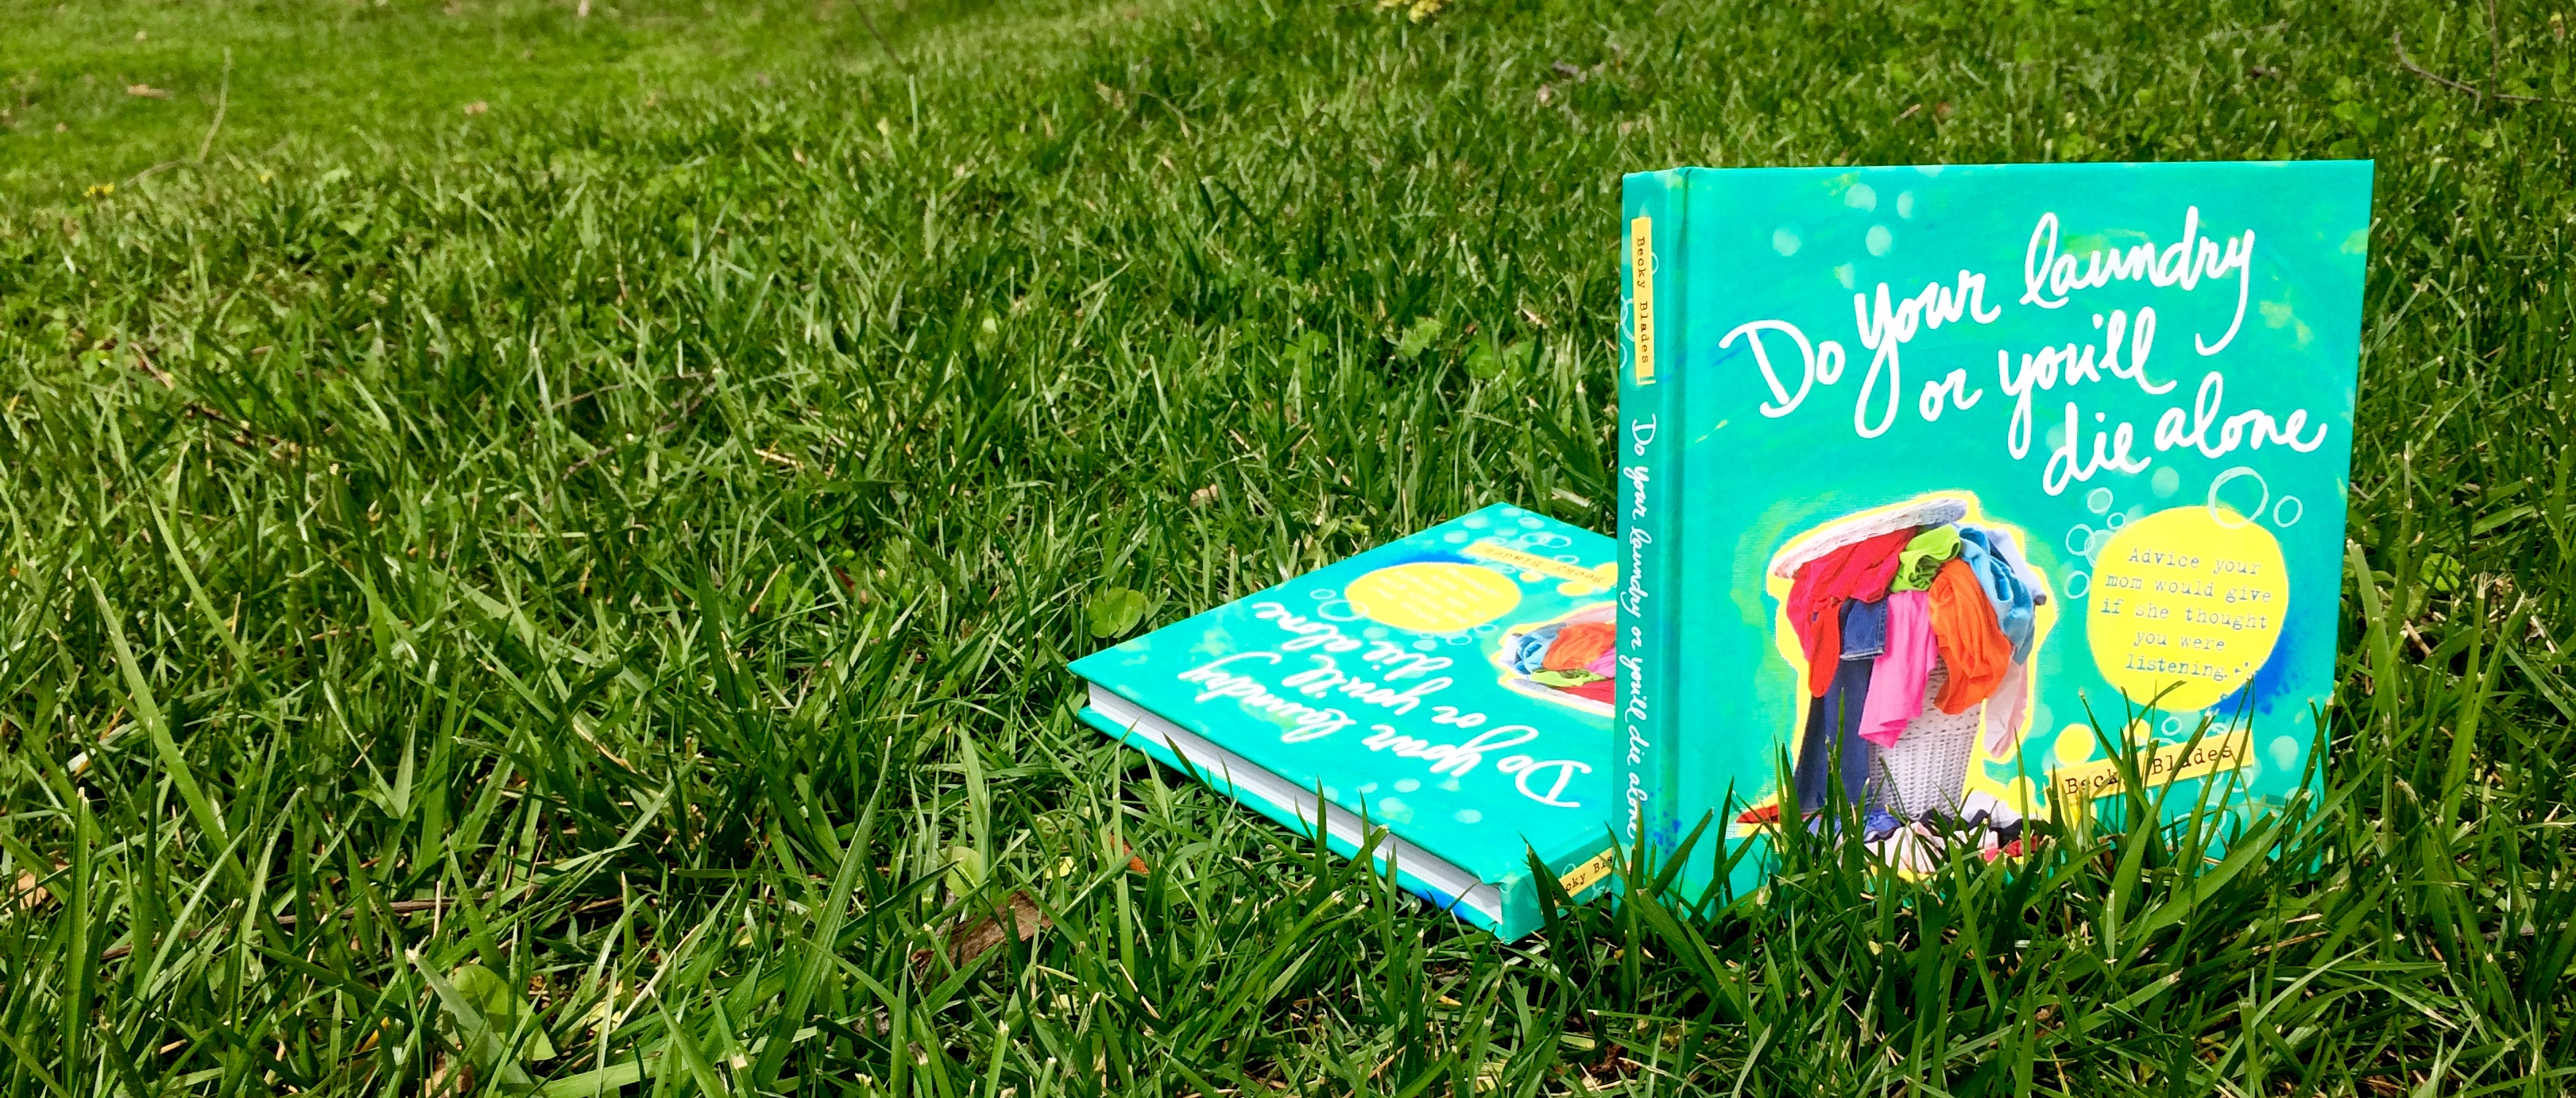 do your laundry or you'll die alone book cover on grass